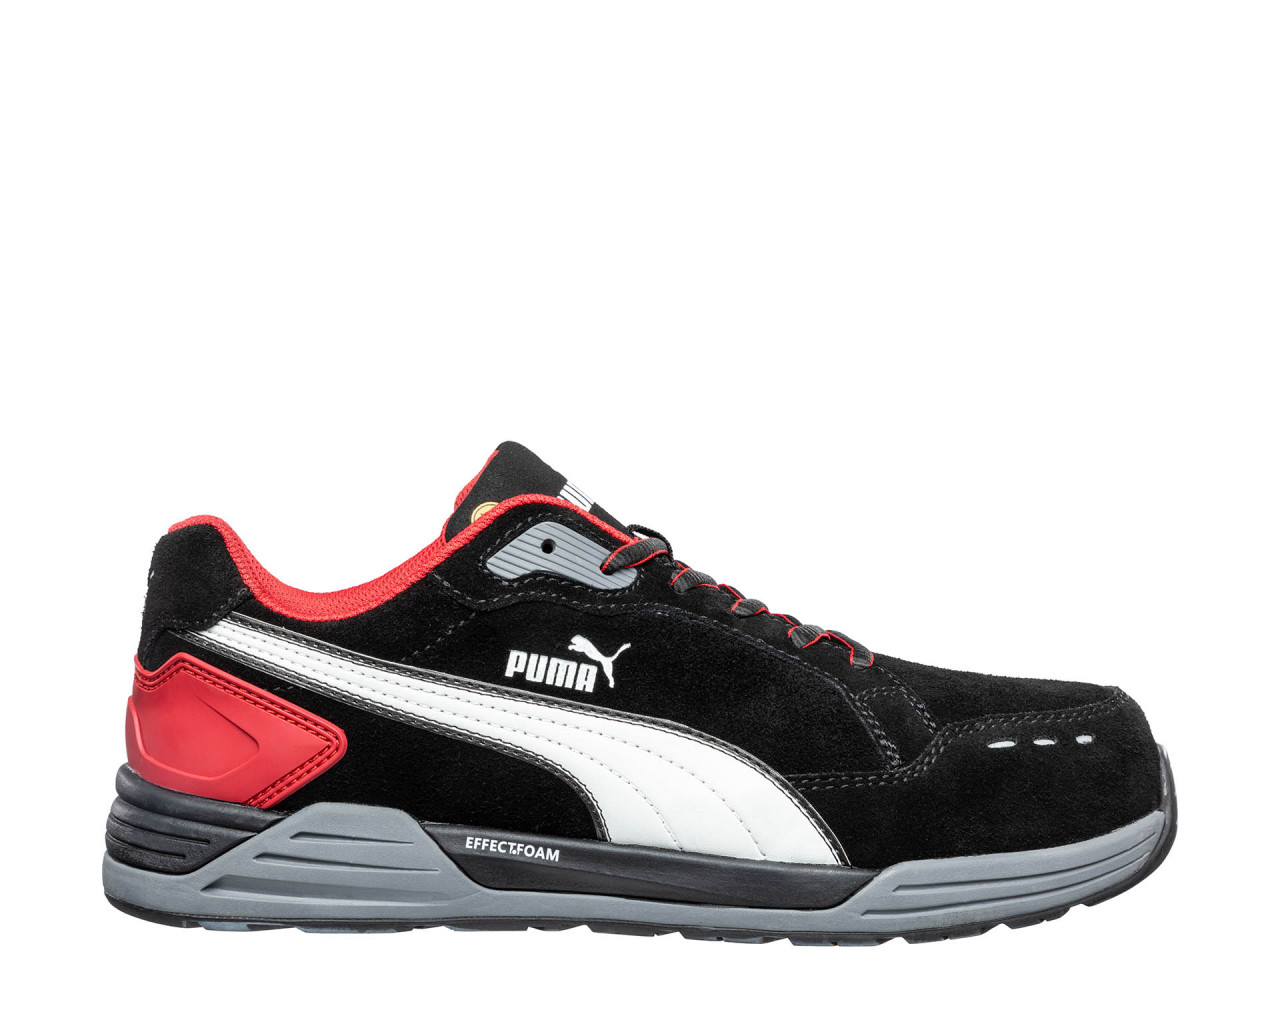 PUMA SAFETY safety shoes BLK/RED ESD Puma LOW English Safety AIRTWIST S3 SRC | HRO